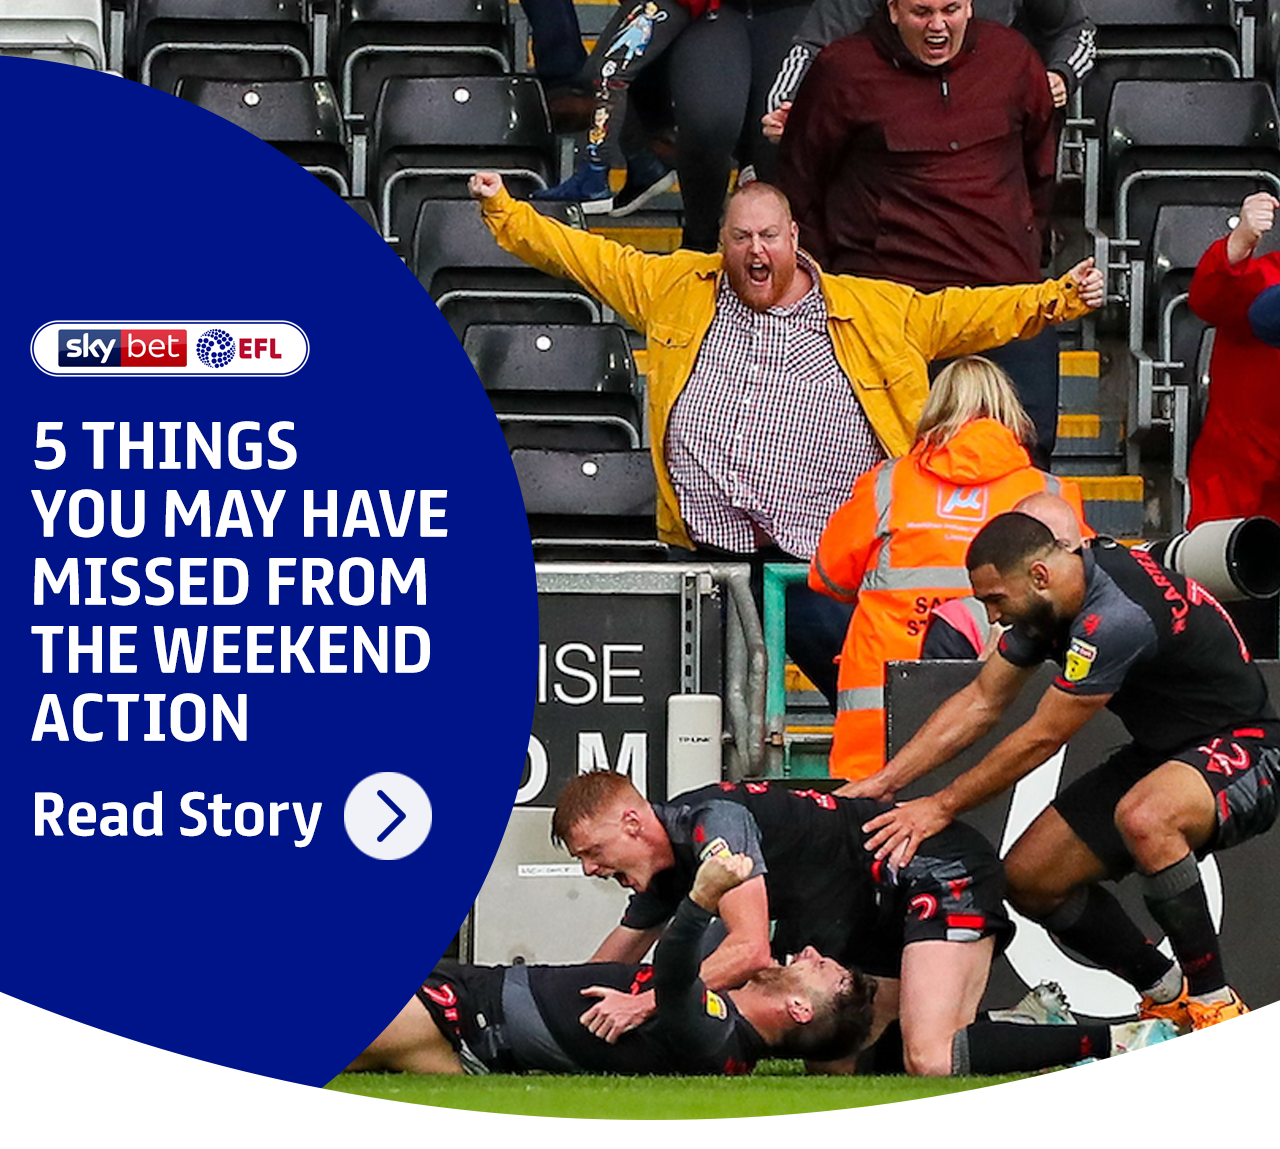 5 things you may have missed from the weekend action